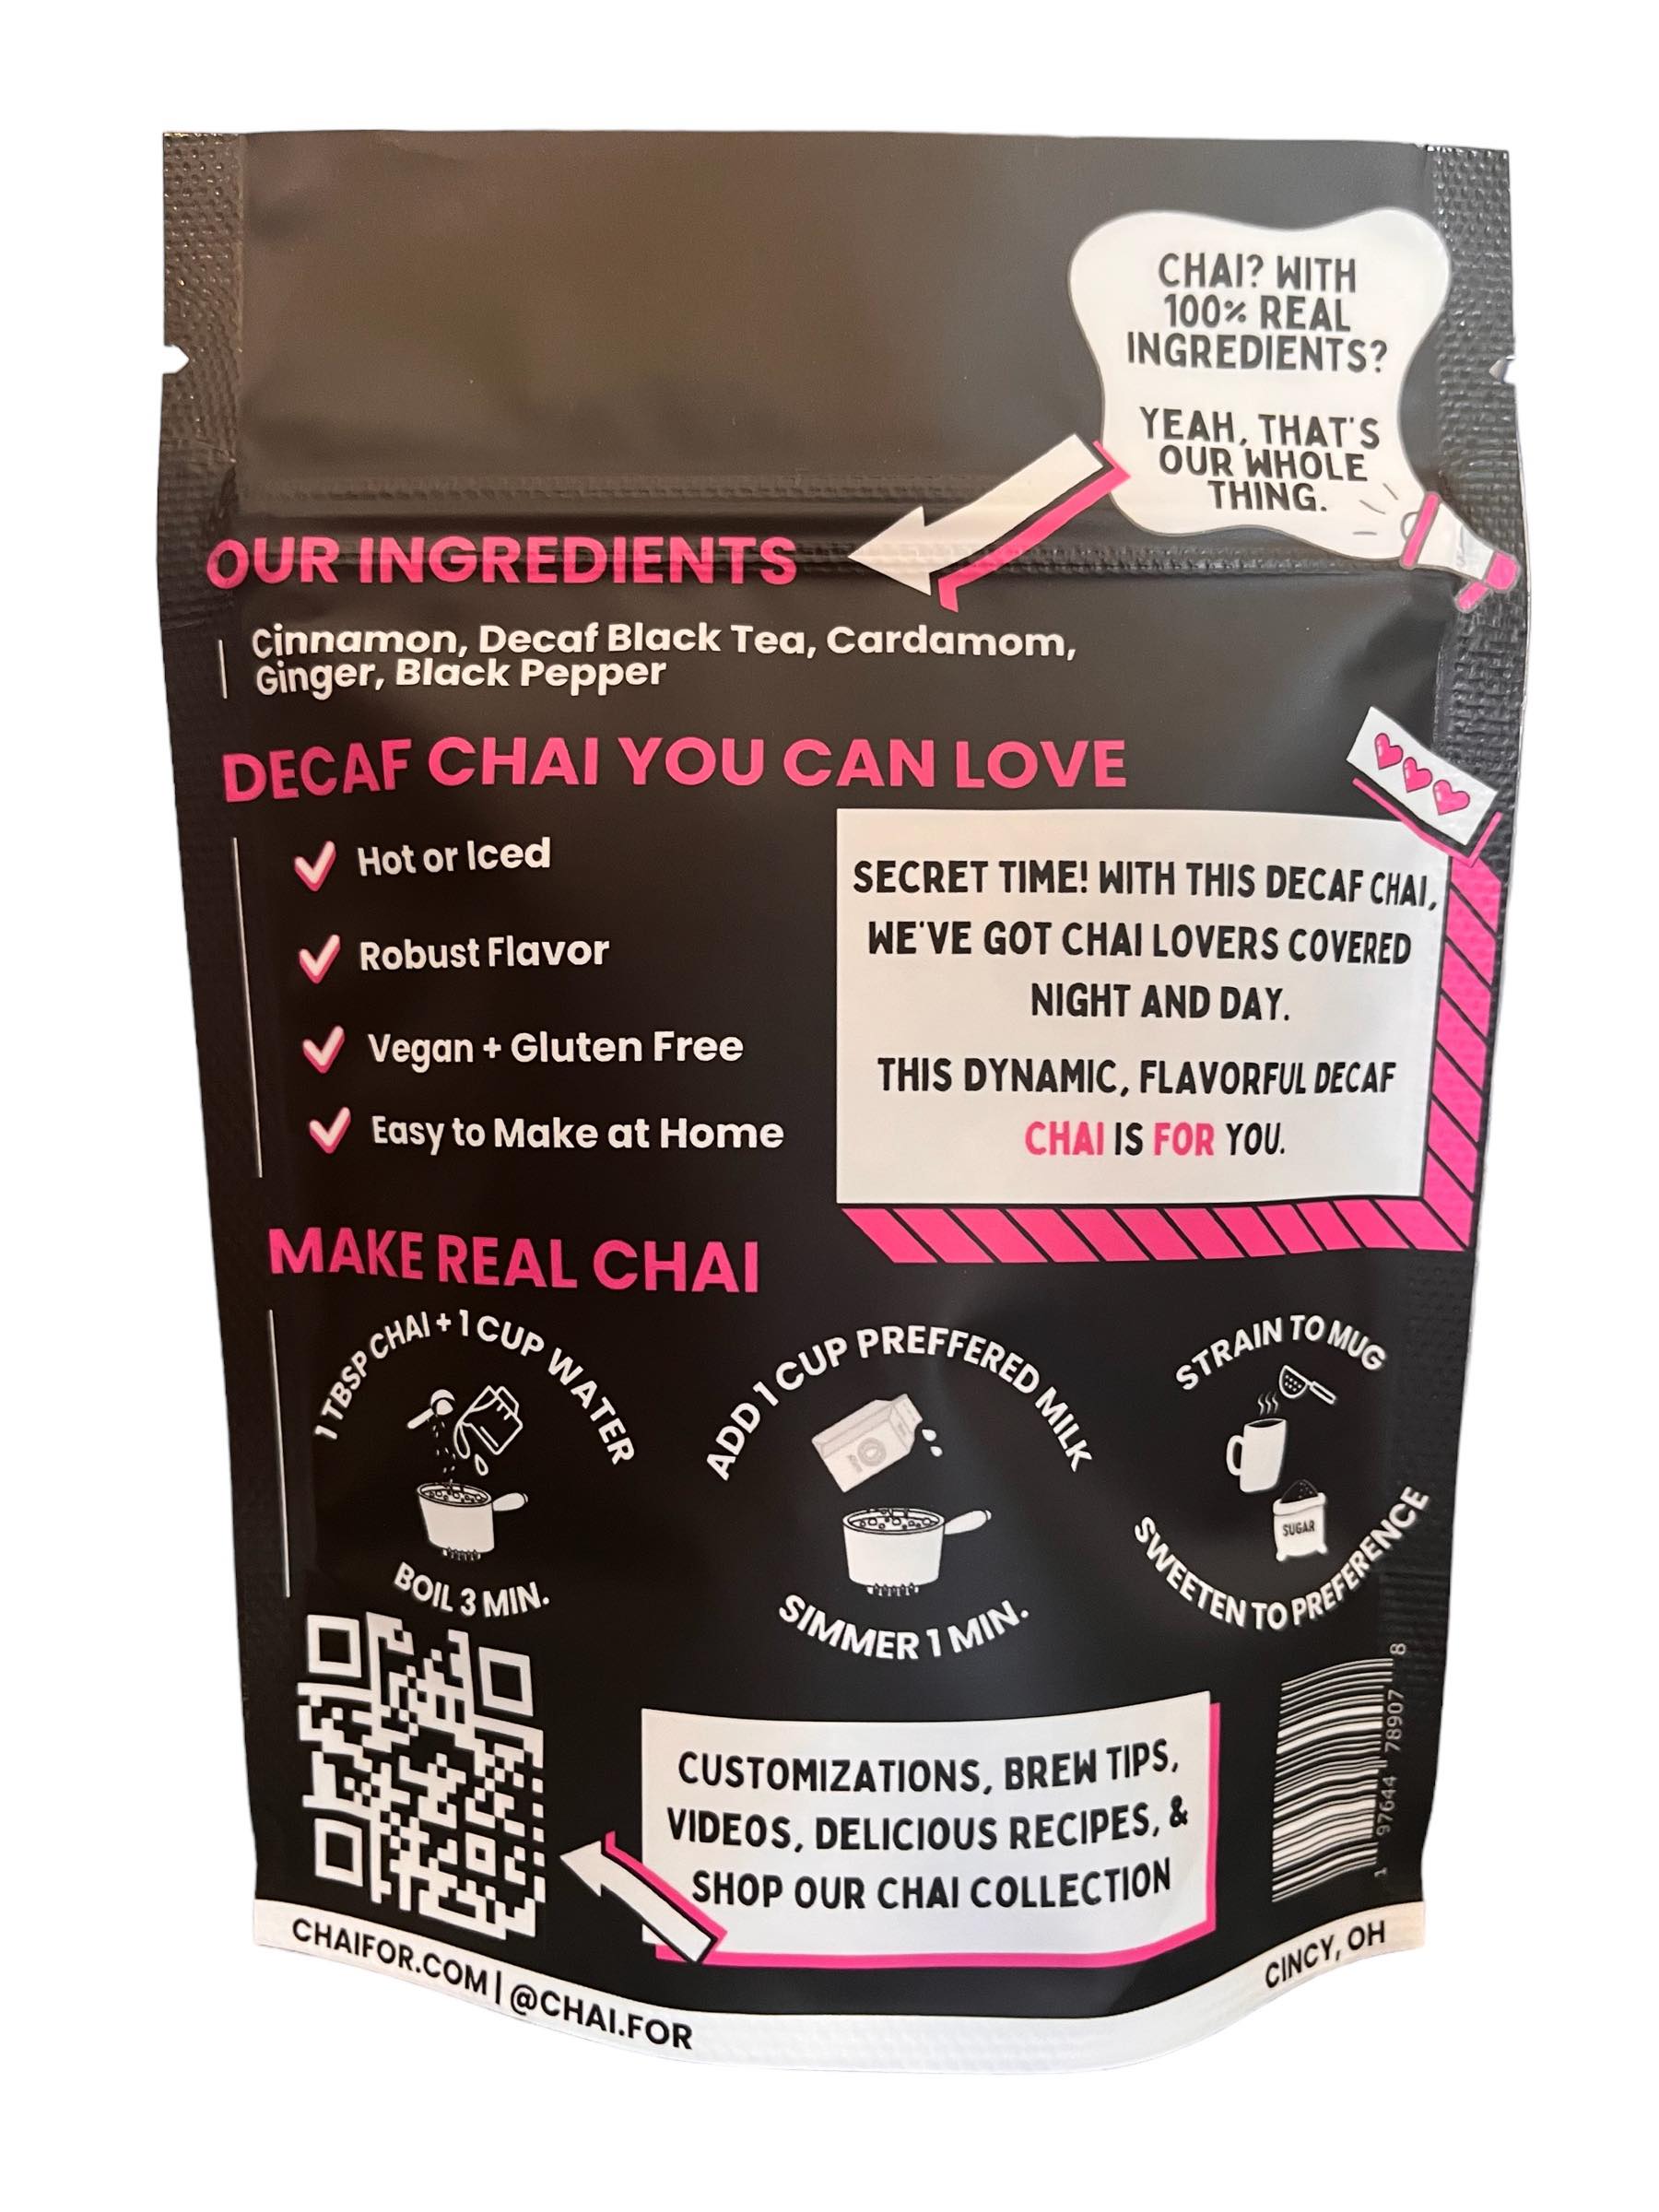 Decaf Chai Packaging showing our ingredients, how to make the chai, and with links to our chai making webpage.